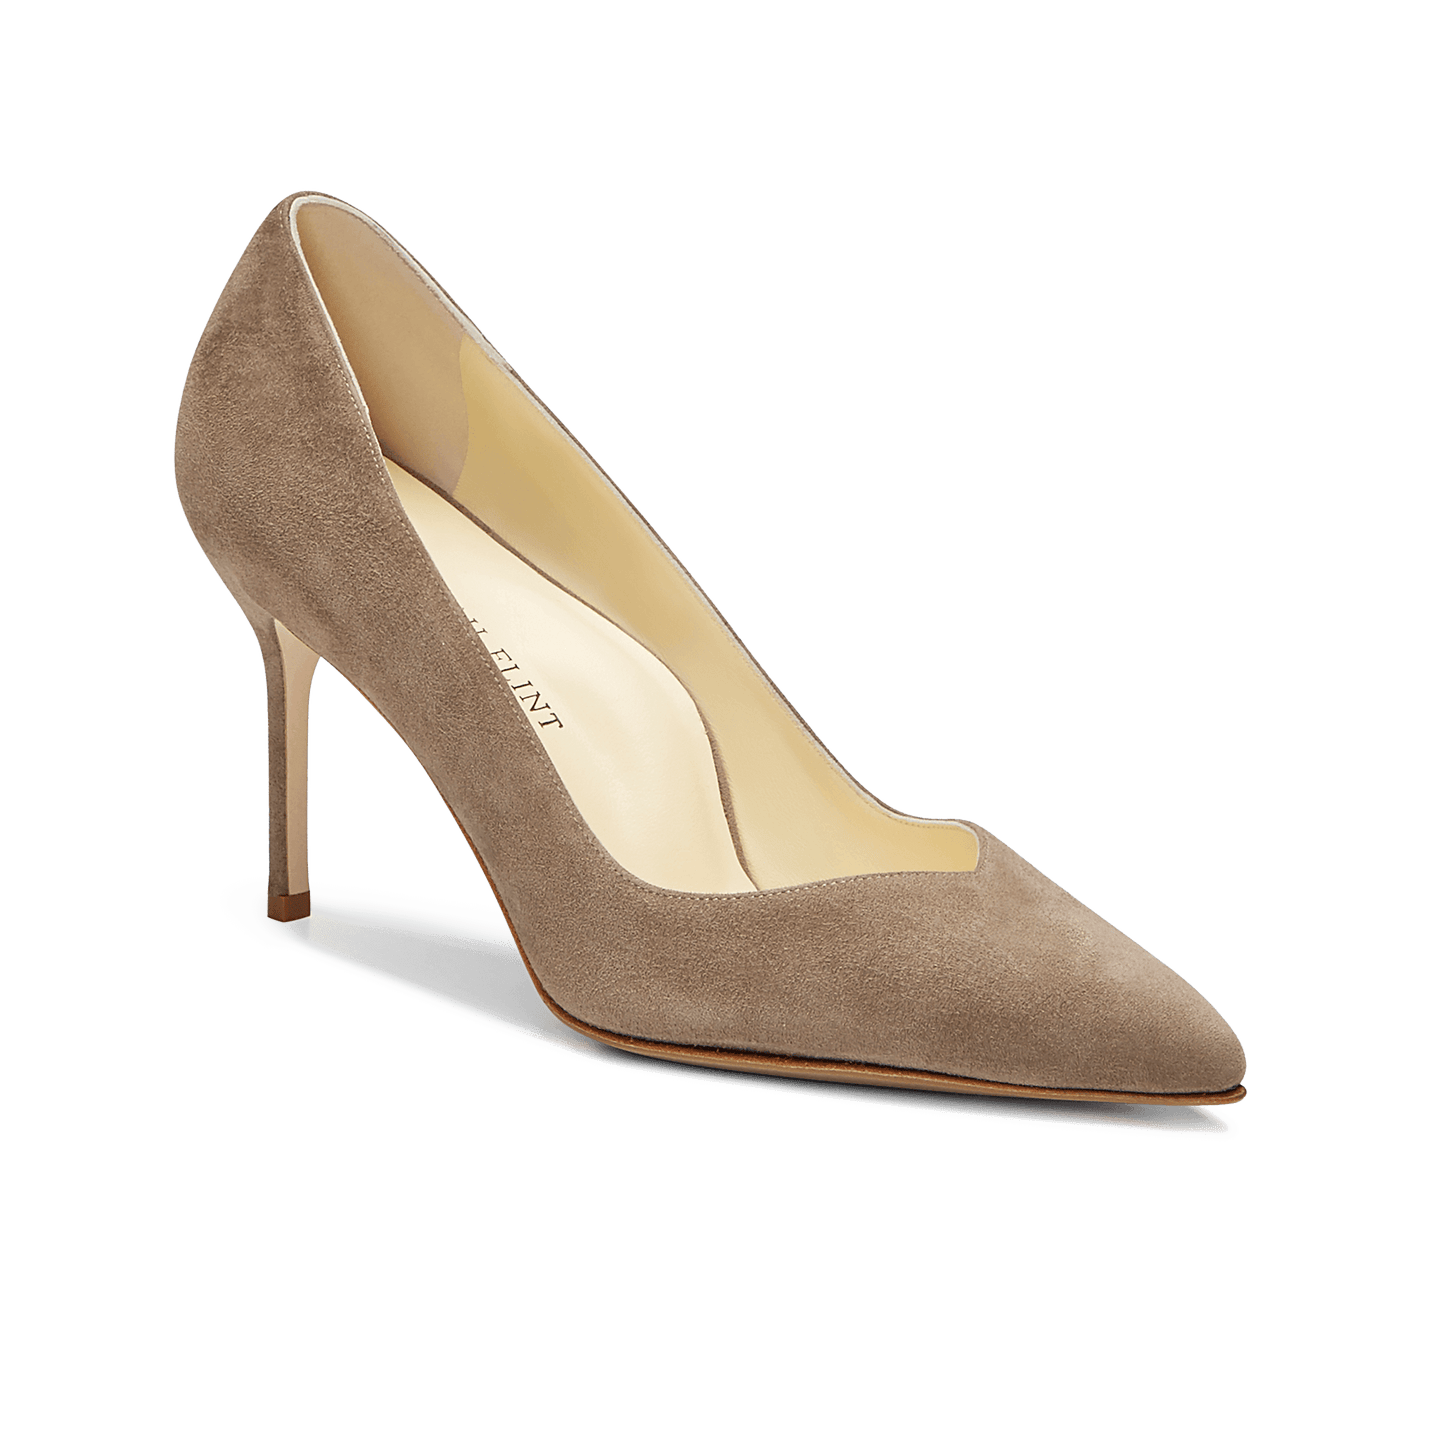 85mm Italian Made Pointed Toe Pump in Taupe Suede